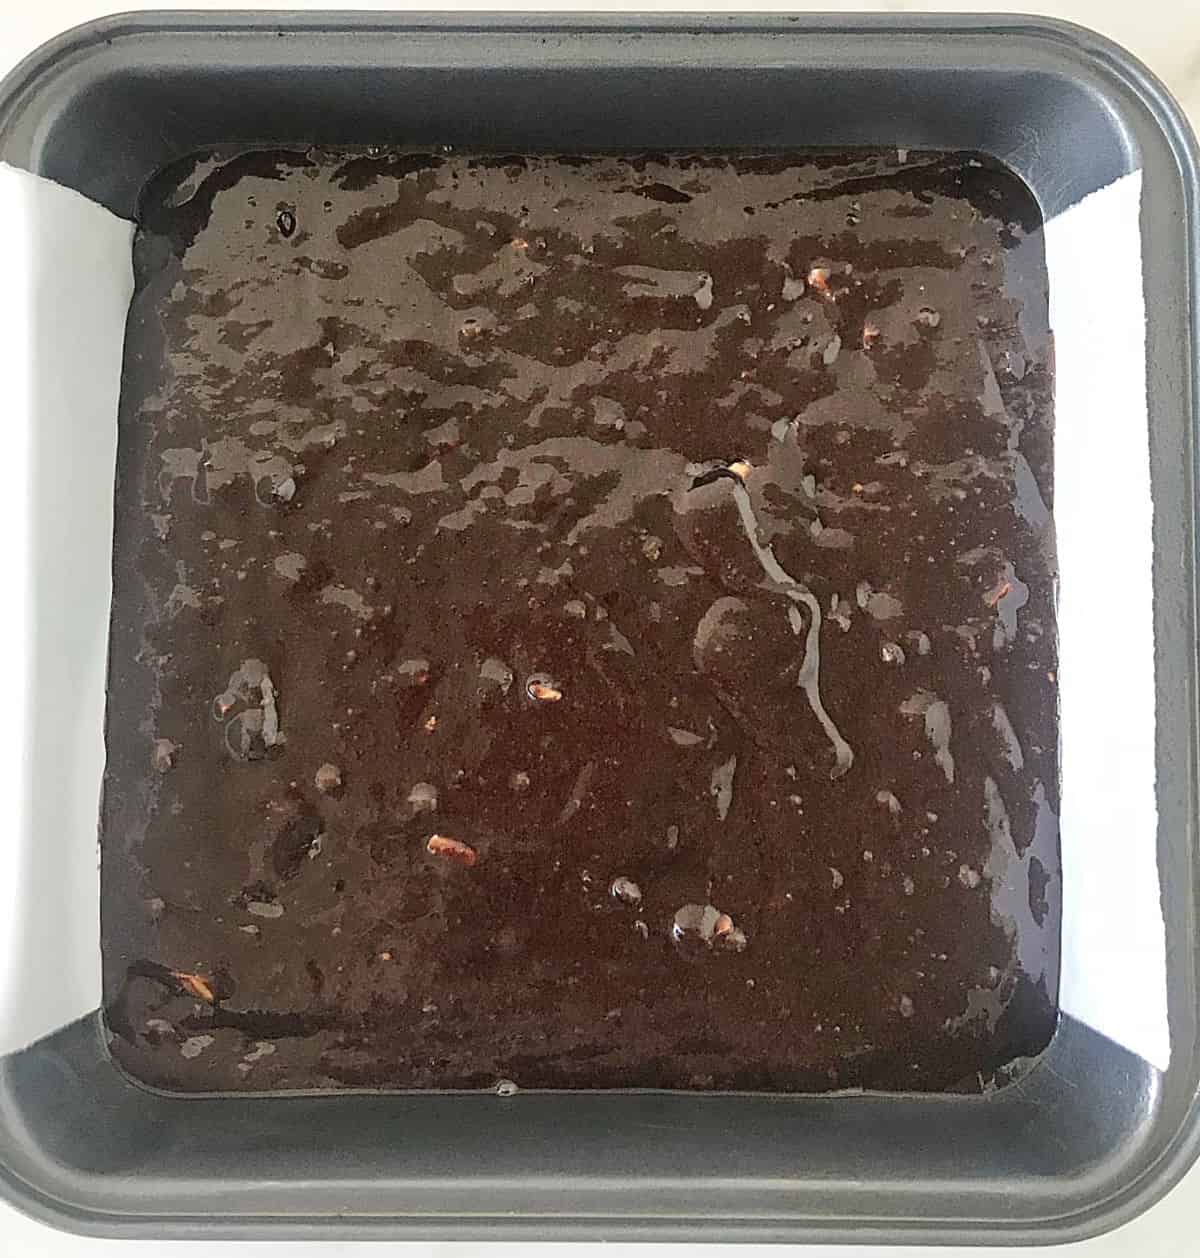 Unbaked brownie batter in metal square pan with parchment paper.